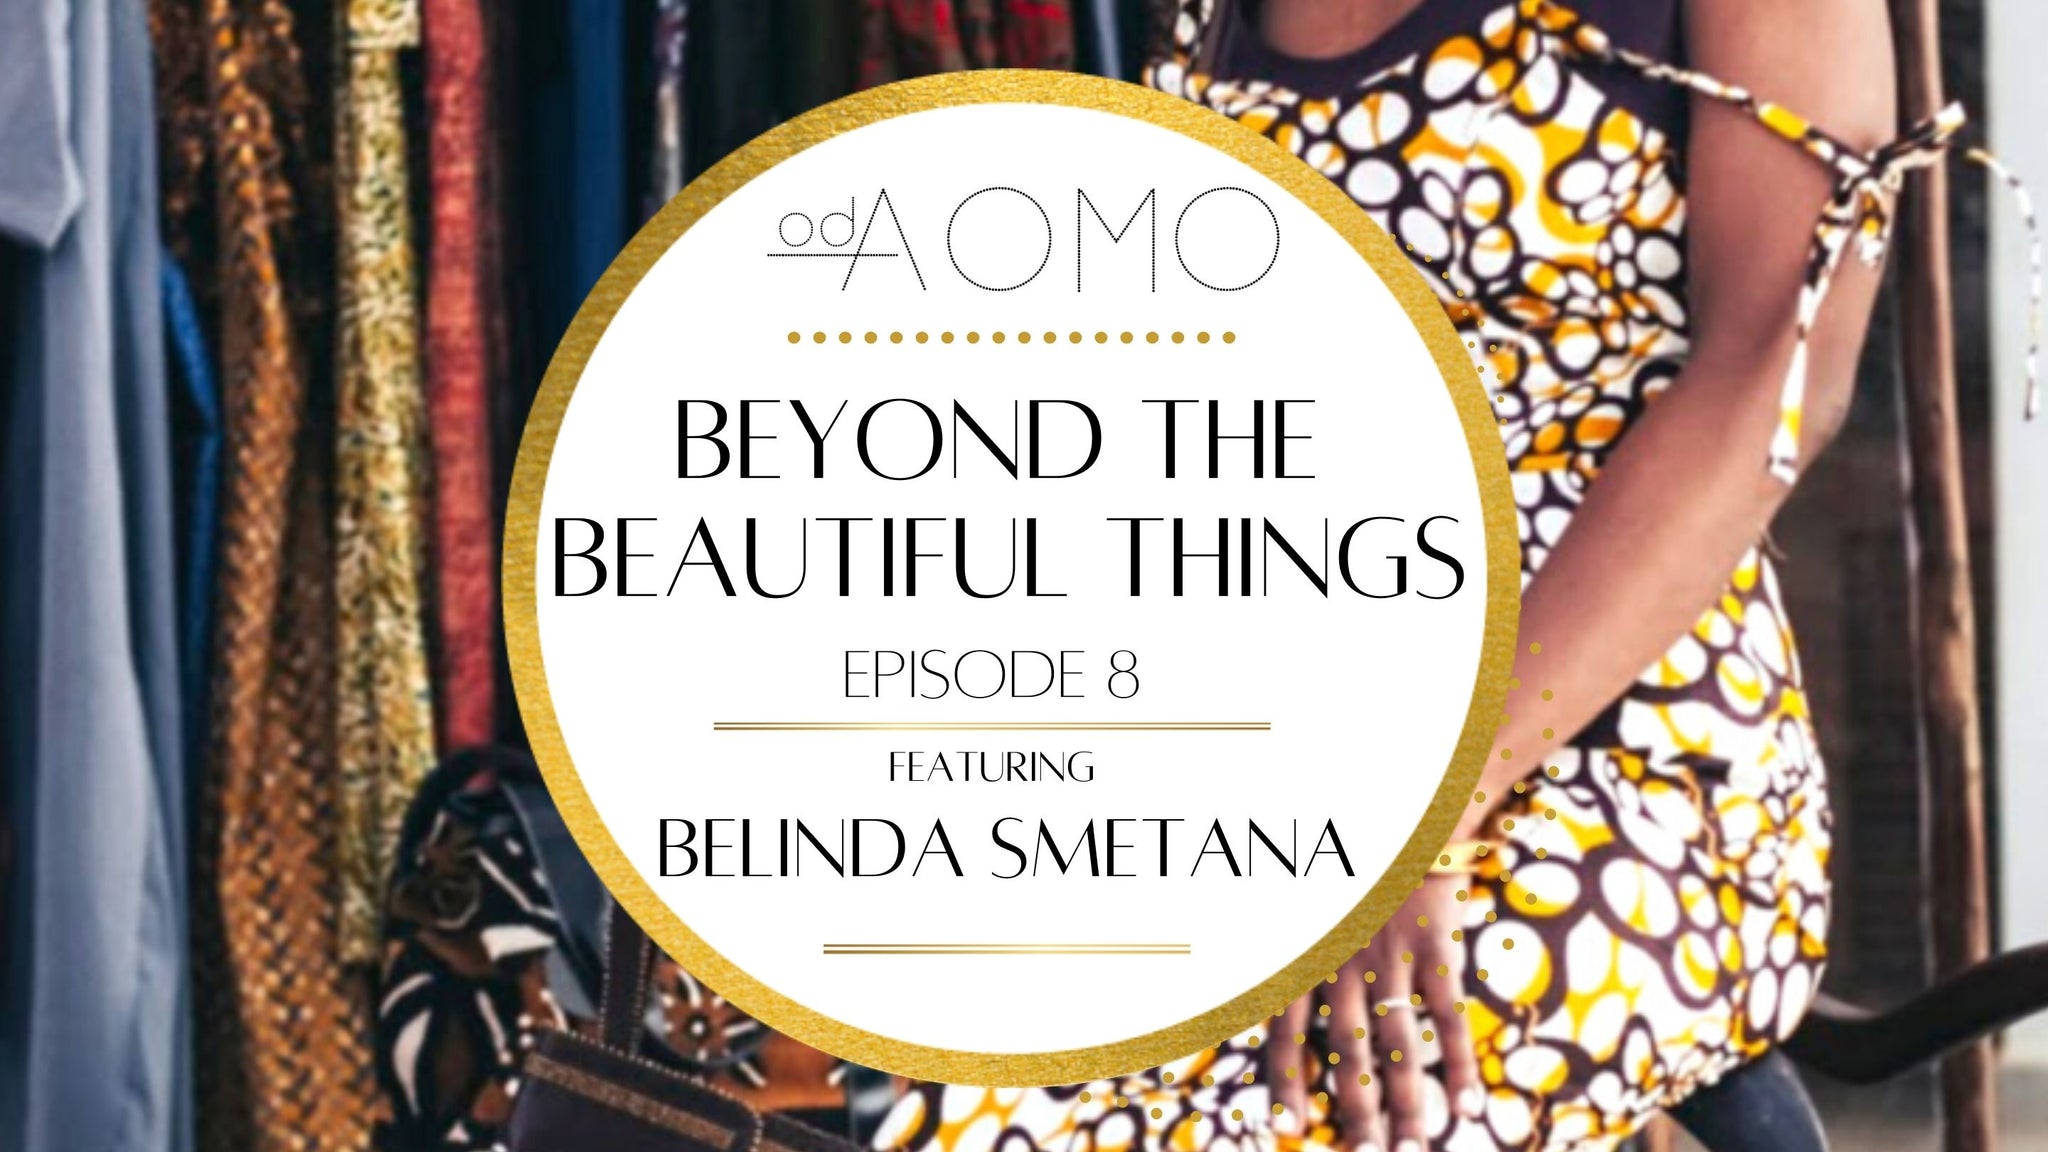 In this episode of Beyond the Beautiful Things we are introduced to Social Media Guru and Sustainable Fashion Advocate, Belinda Smetana!